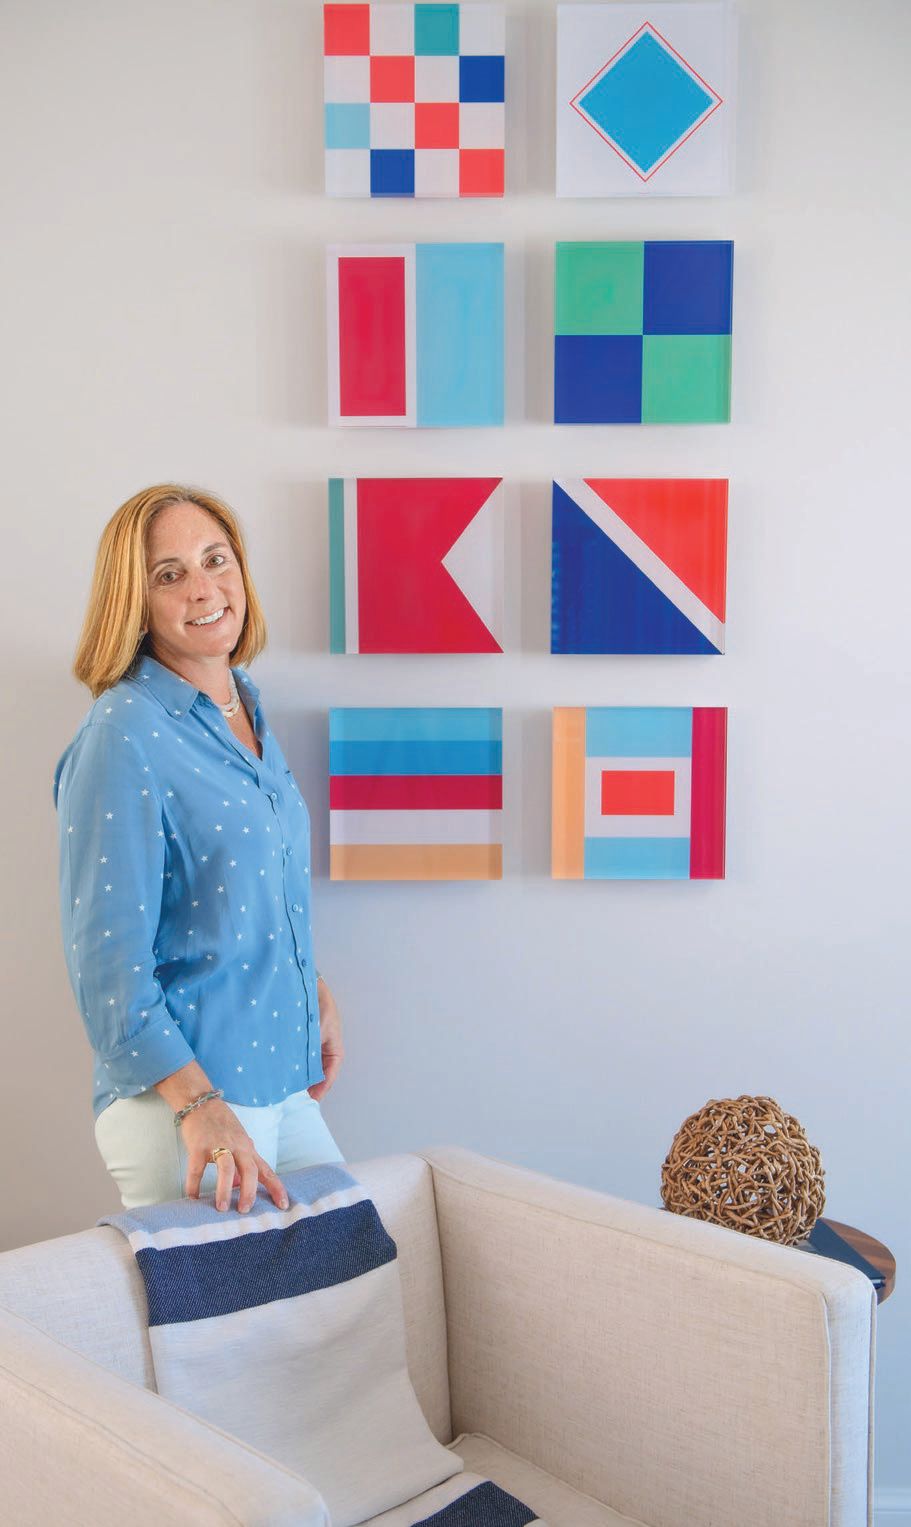 Artist Susan Currie with her Charmcodes collection in West Palm Beach PHOTO COURTESY OF SUSAN CURRIE